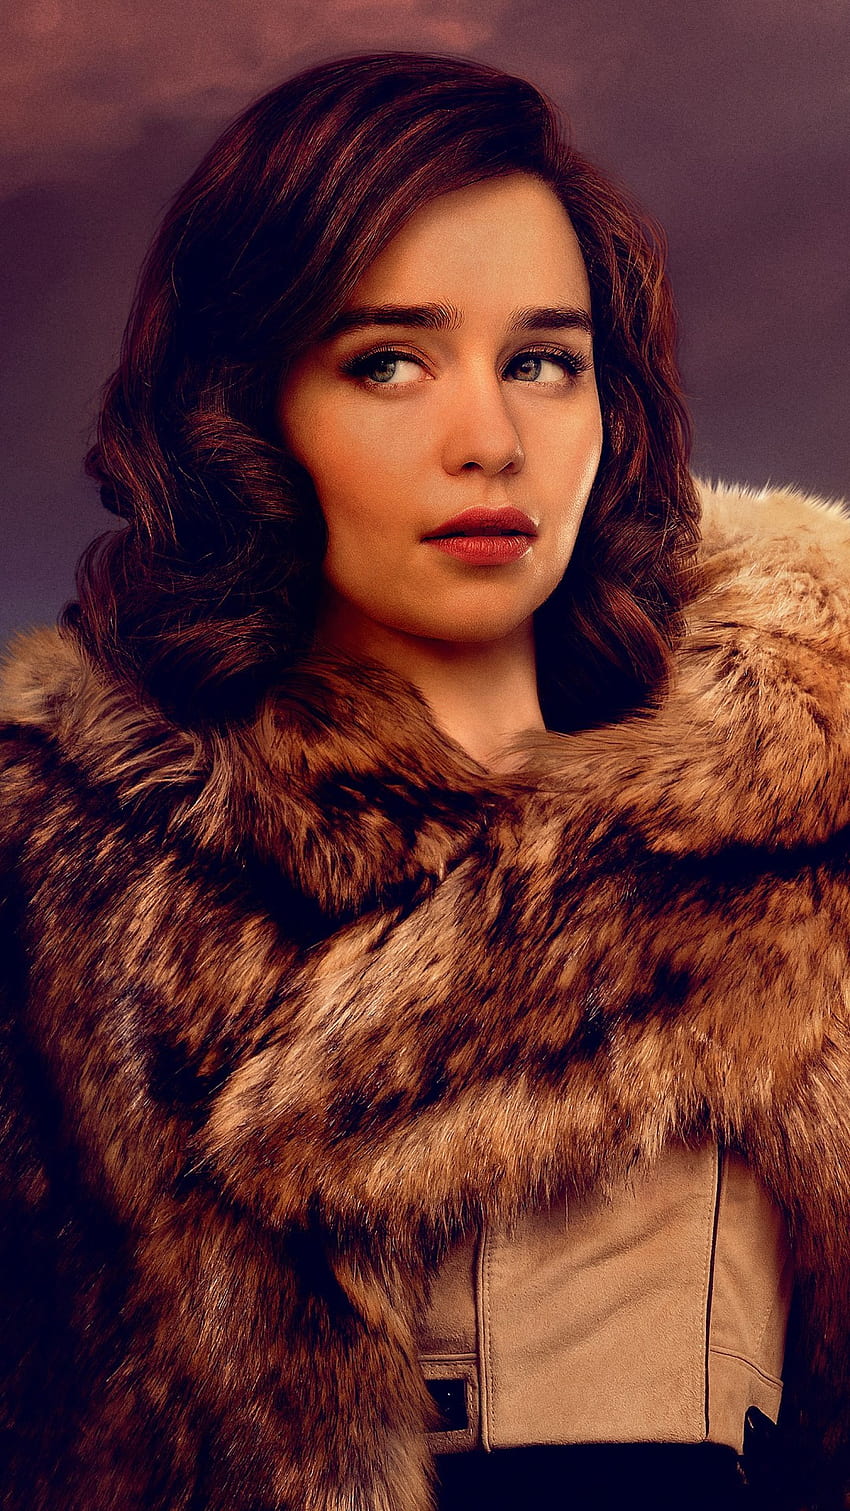 Emilia Clarke, Solo: A Star Wars Story for iPhone 8, iPhone 7 Plus, iPhone 6+, Sony Xperia Z, HTC One HD phone wallpaper